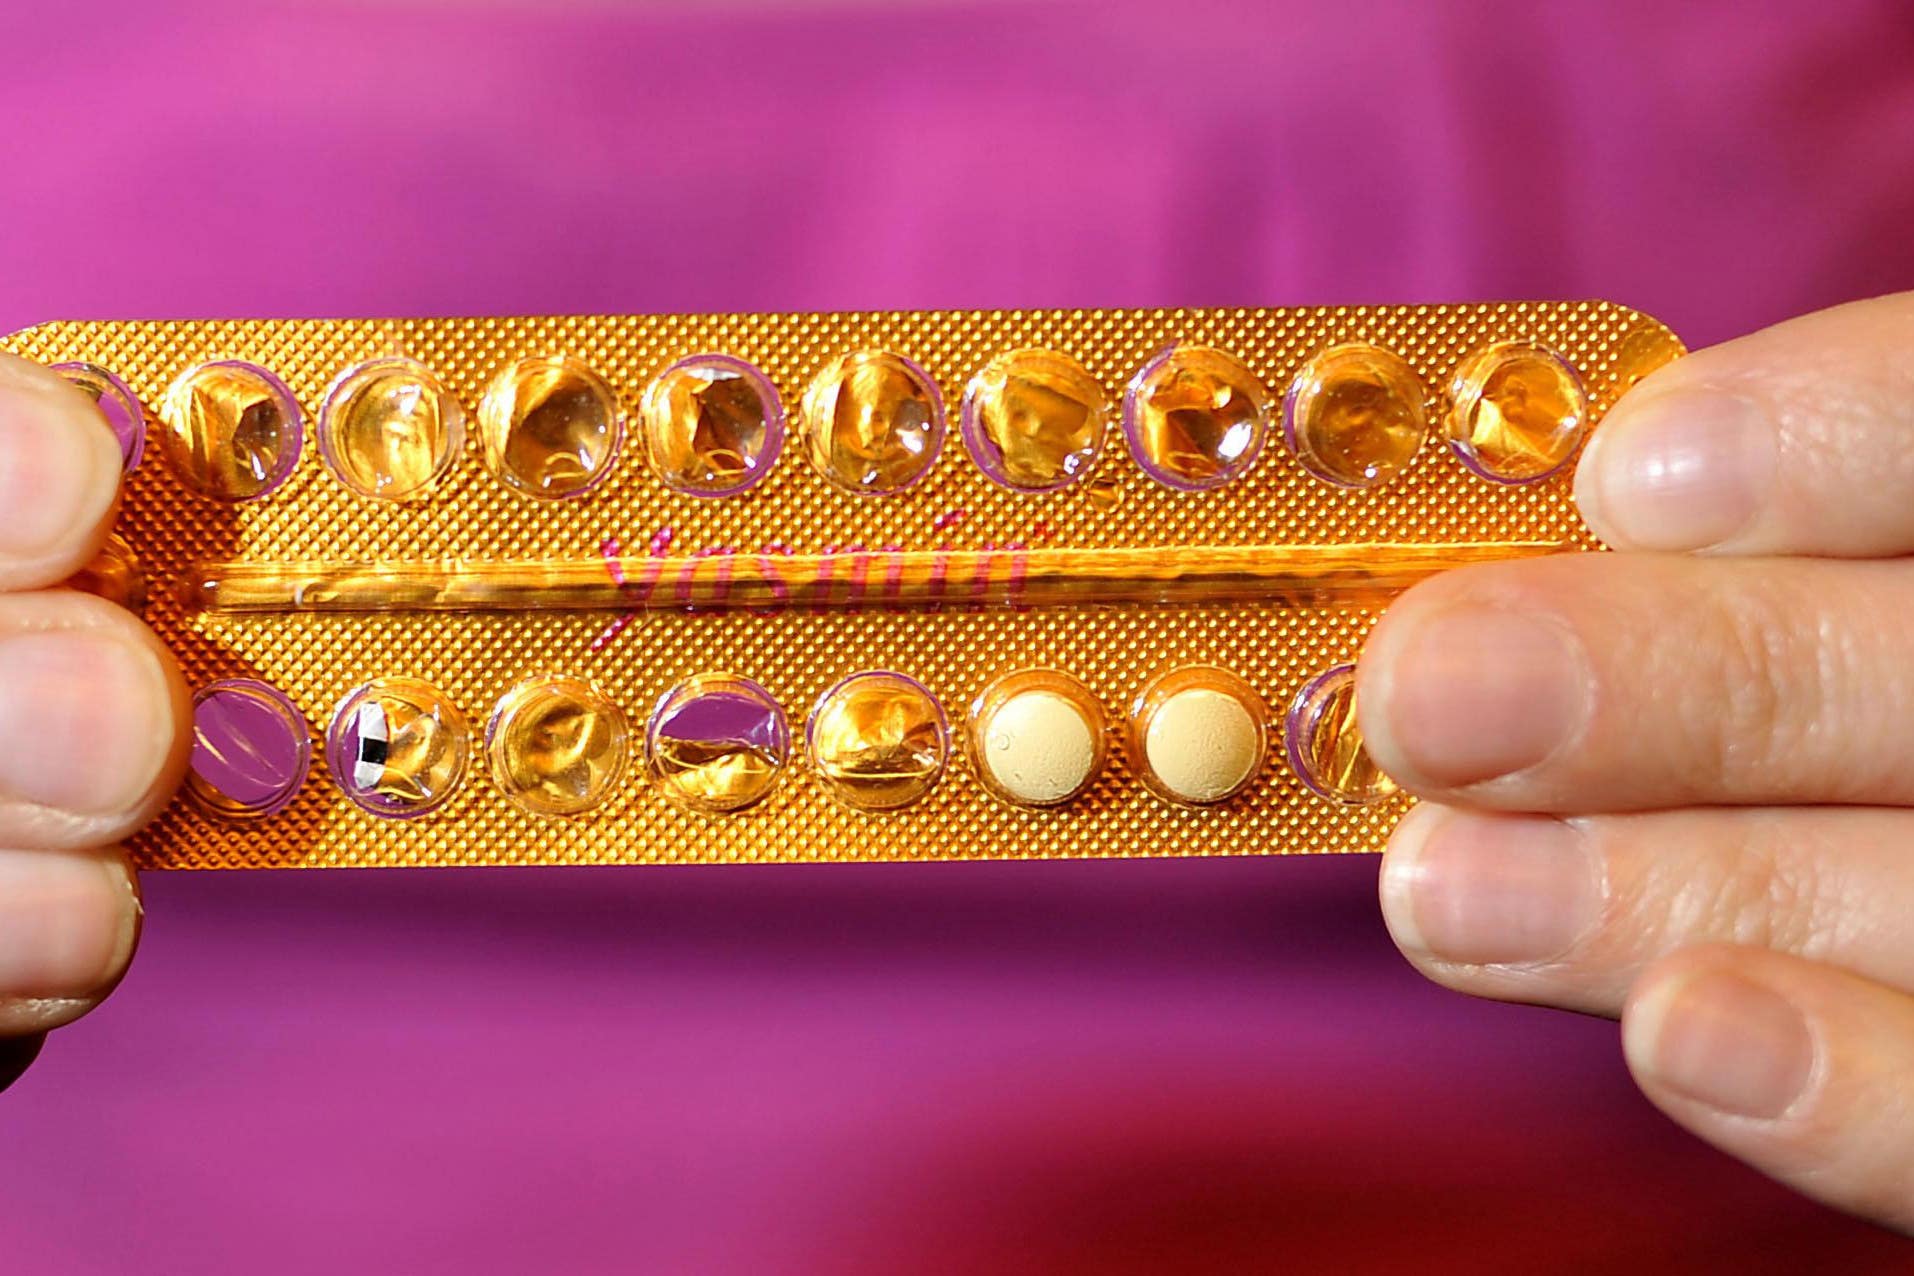 Any type of hormonal contraceptive may increase risk of breast cancer – study (Tim Ireland/PA)